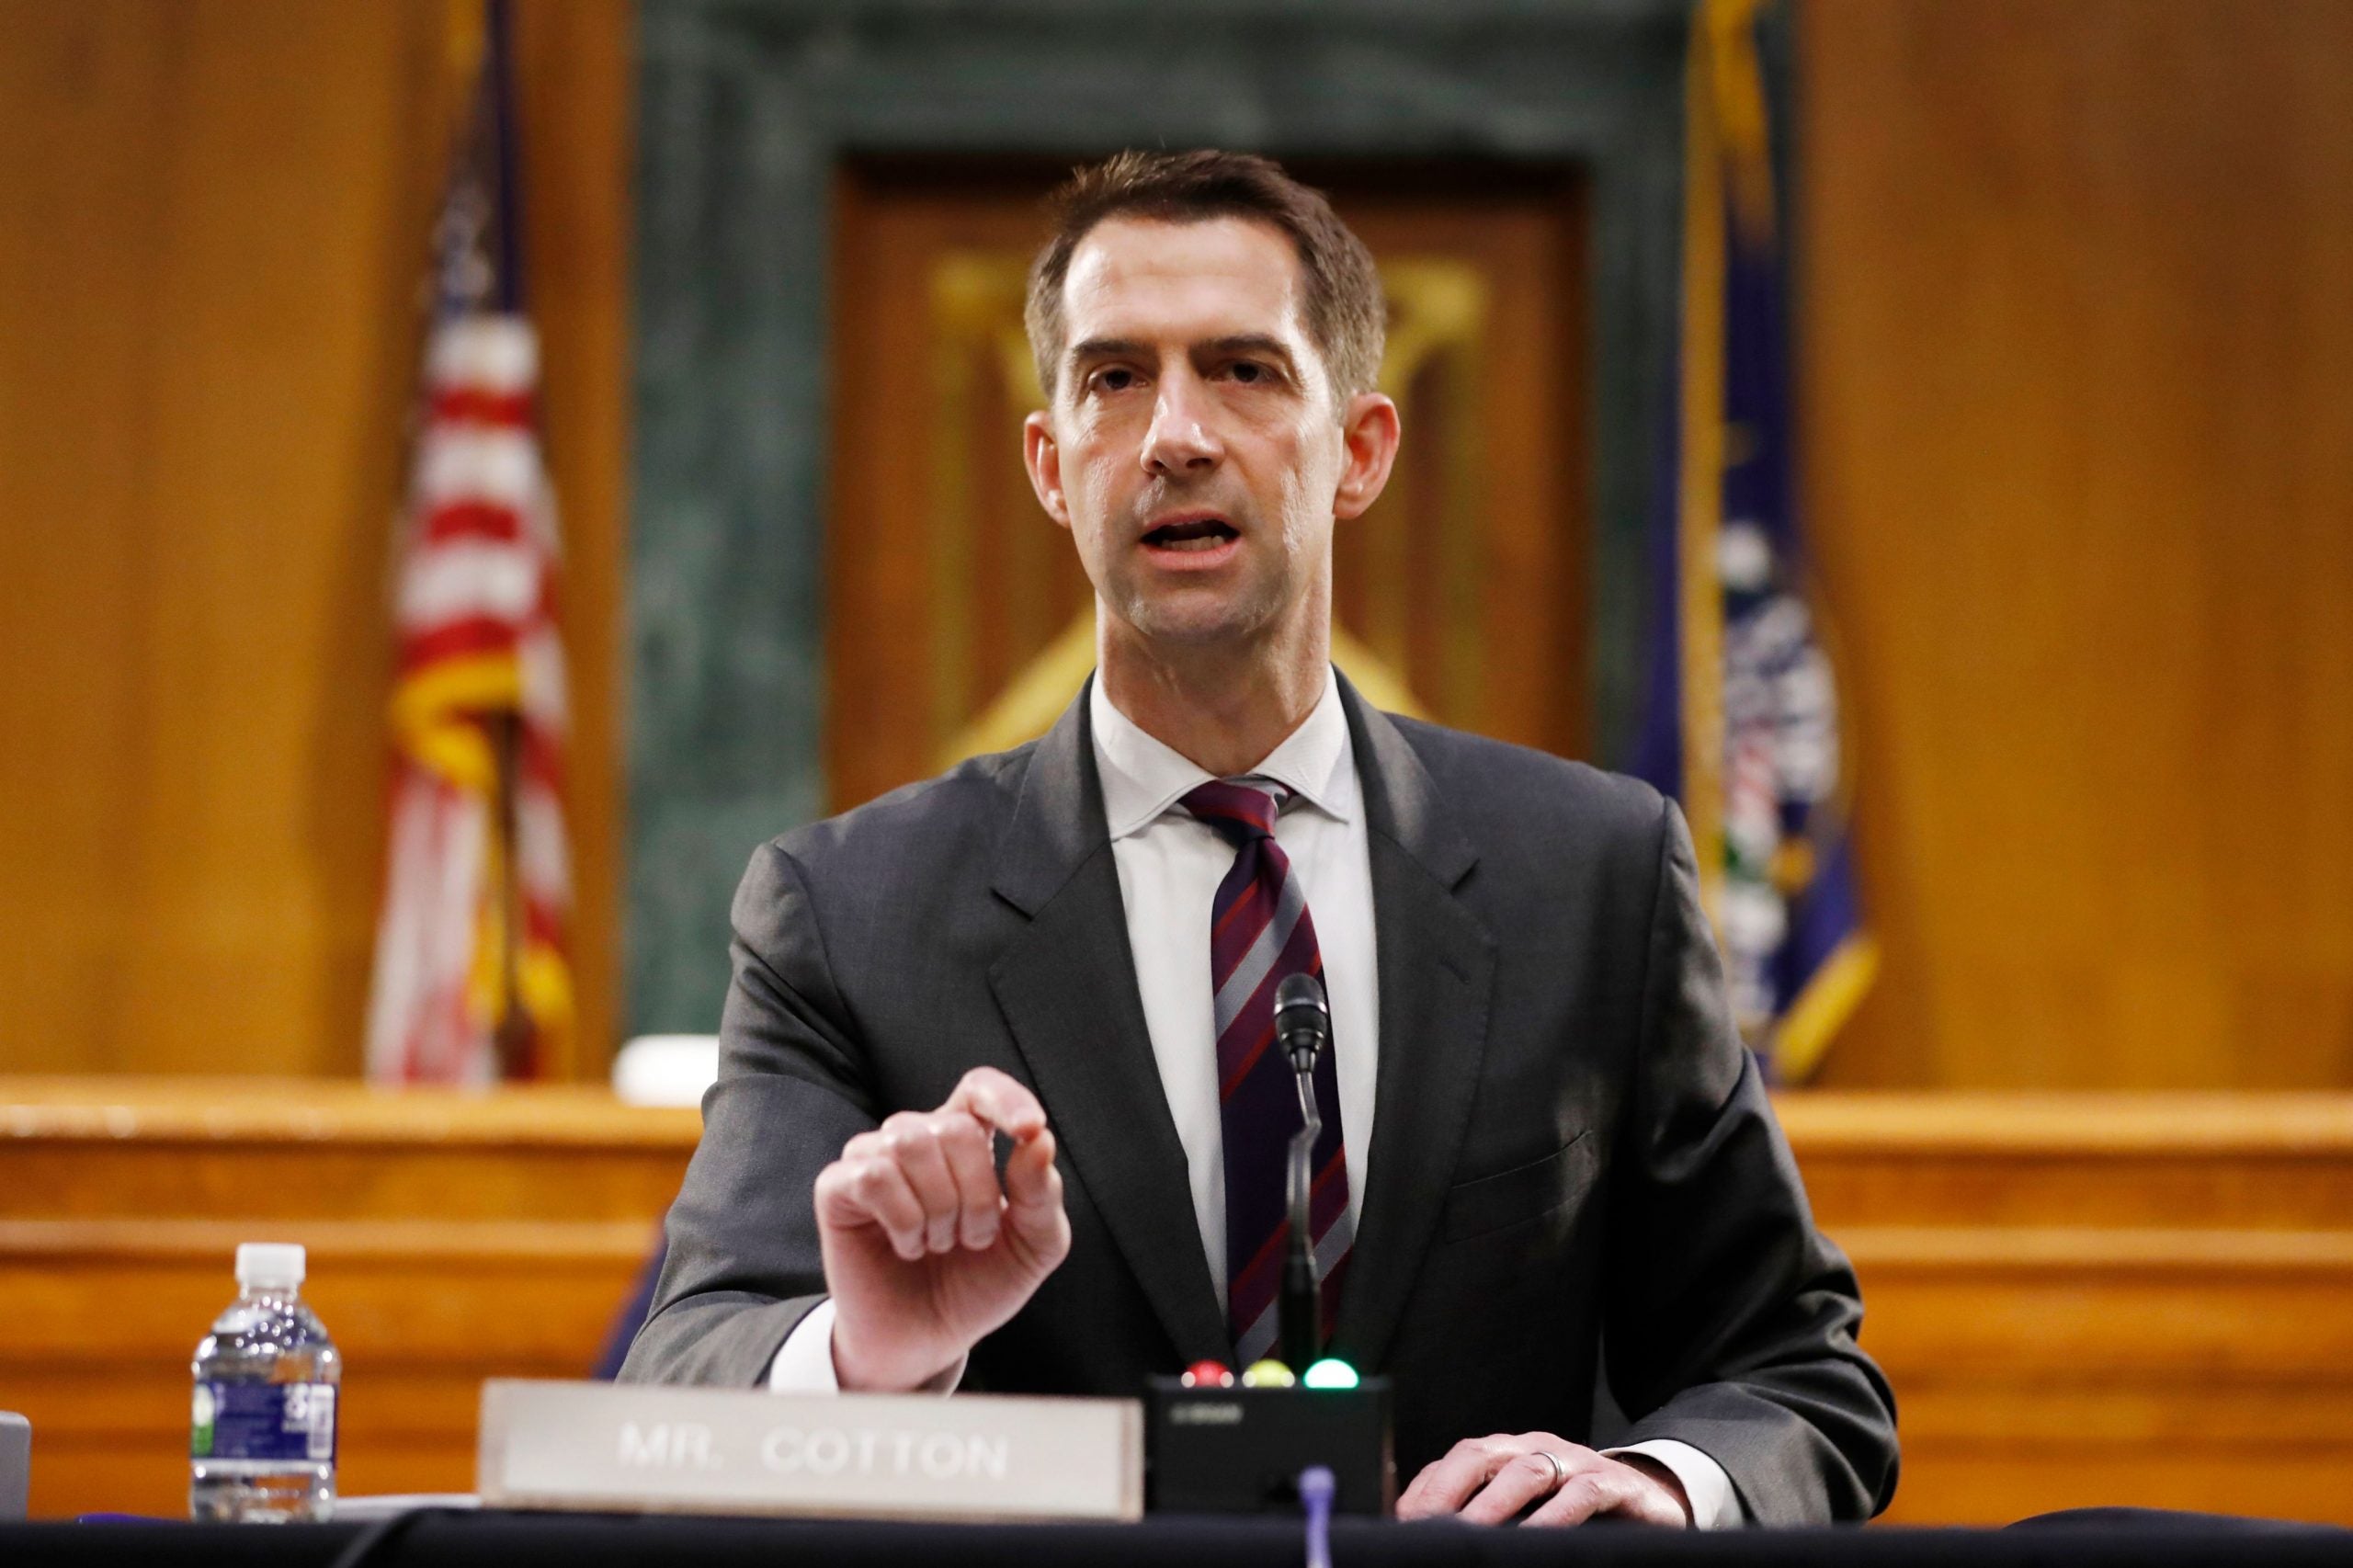 Twitter Ripped Into Republican Sen. Tom Cotton For Saying Slavery Was A ‘Necessary Evil’